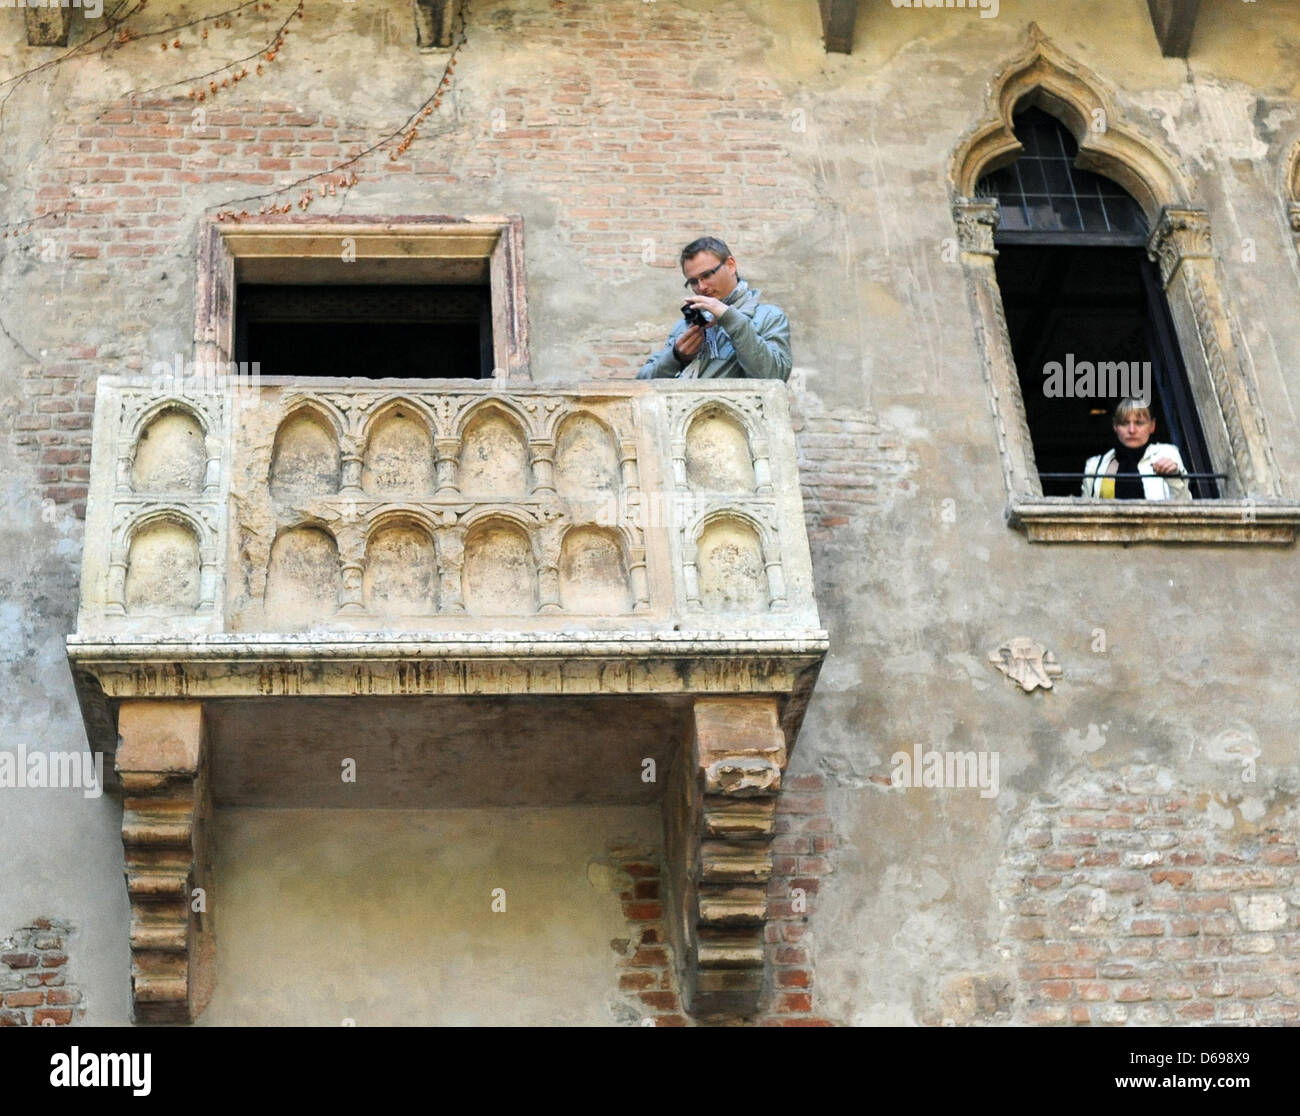 A tourist takes a picture from the balcony on which Juliet from Shakespeatre's Romeo and Juliet is supposed to have stood in the inner courtyard of Casa die Giulietta in Verona, Italy, 21 April 2012. Photo: Britta Pedersen Stock Photo